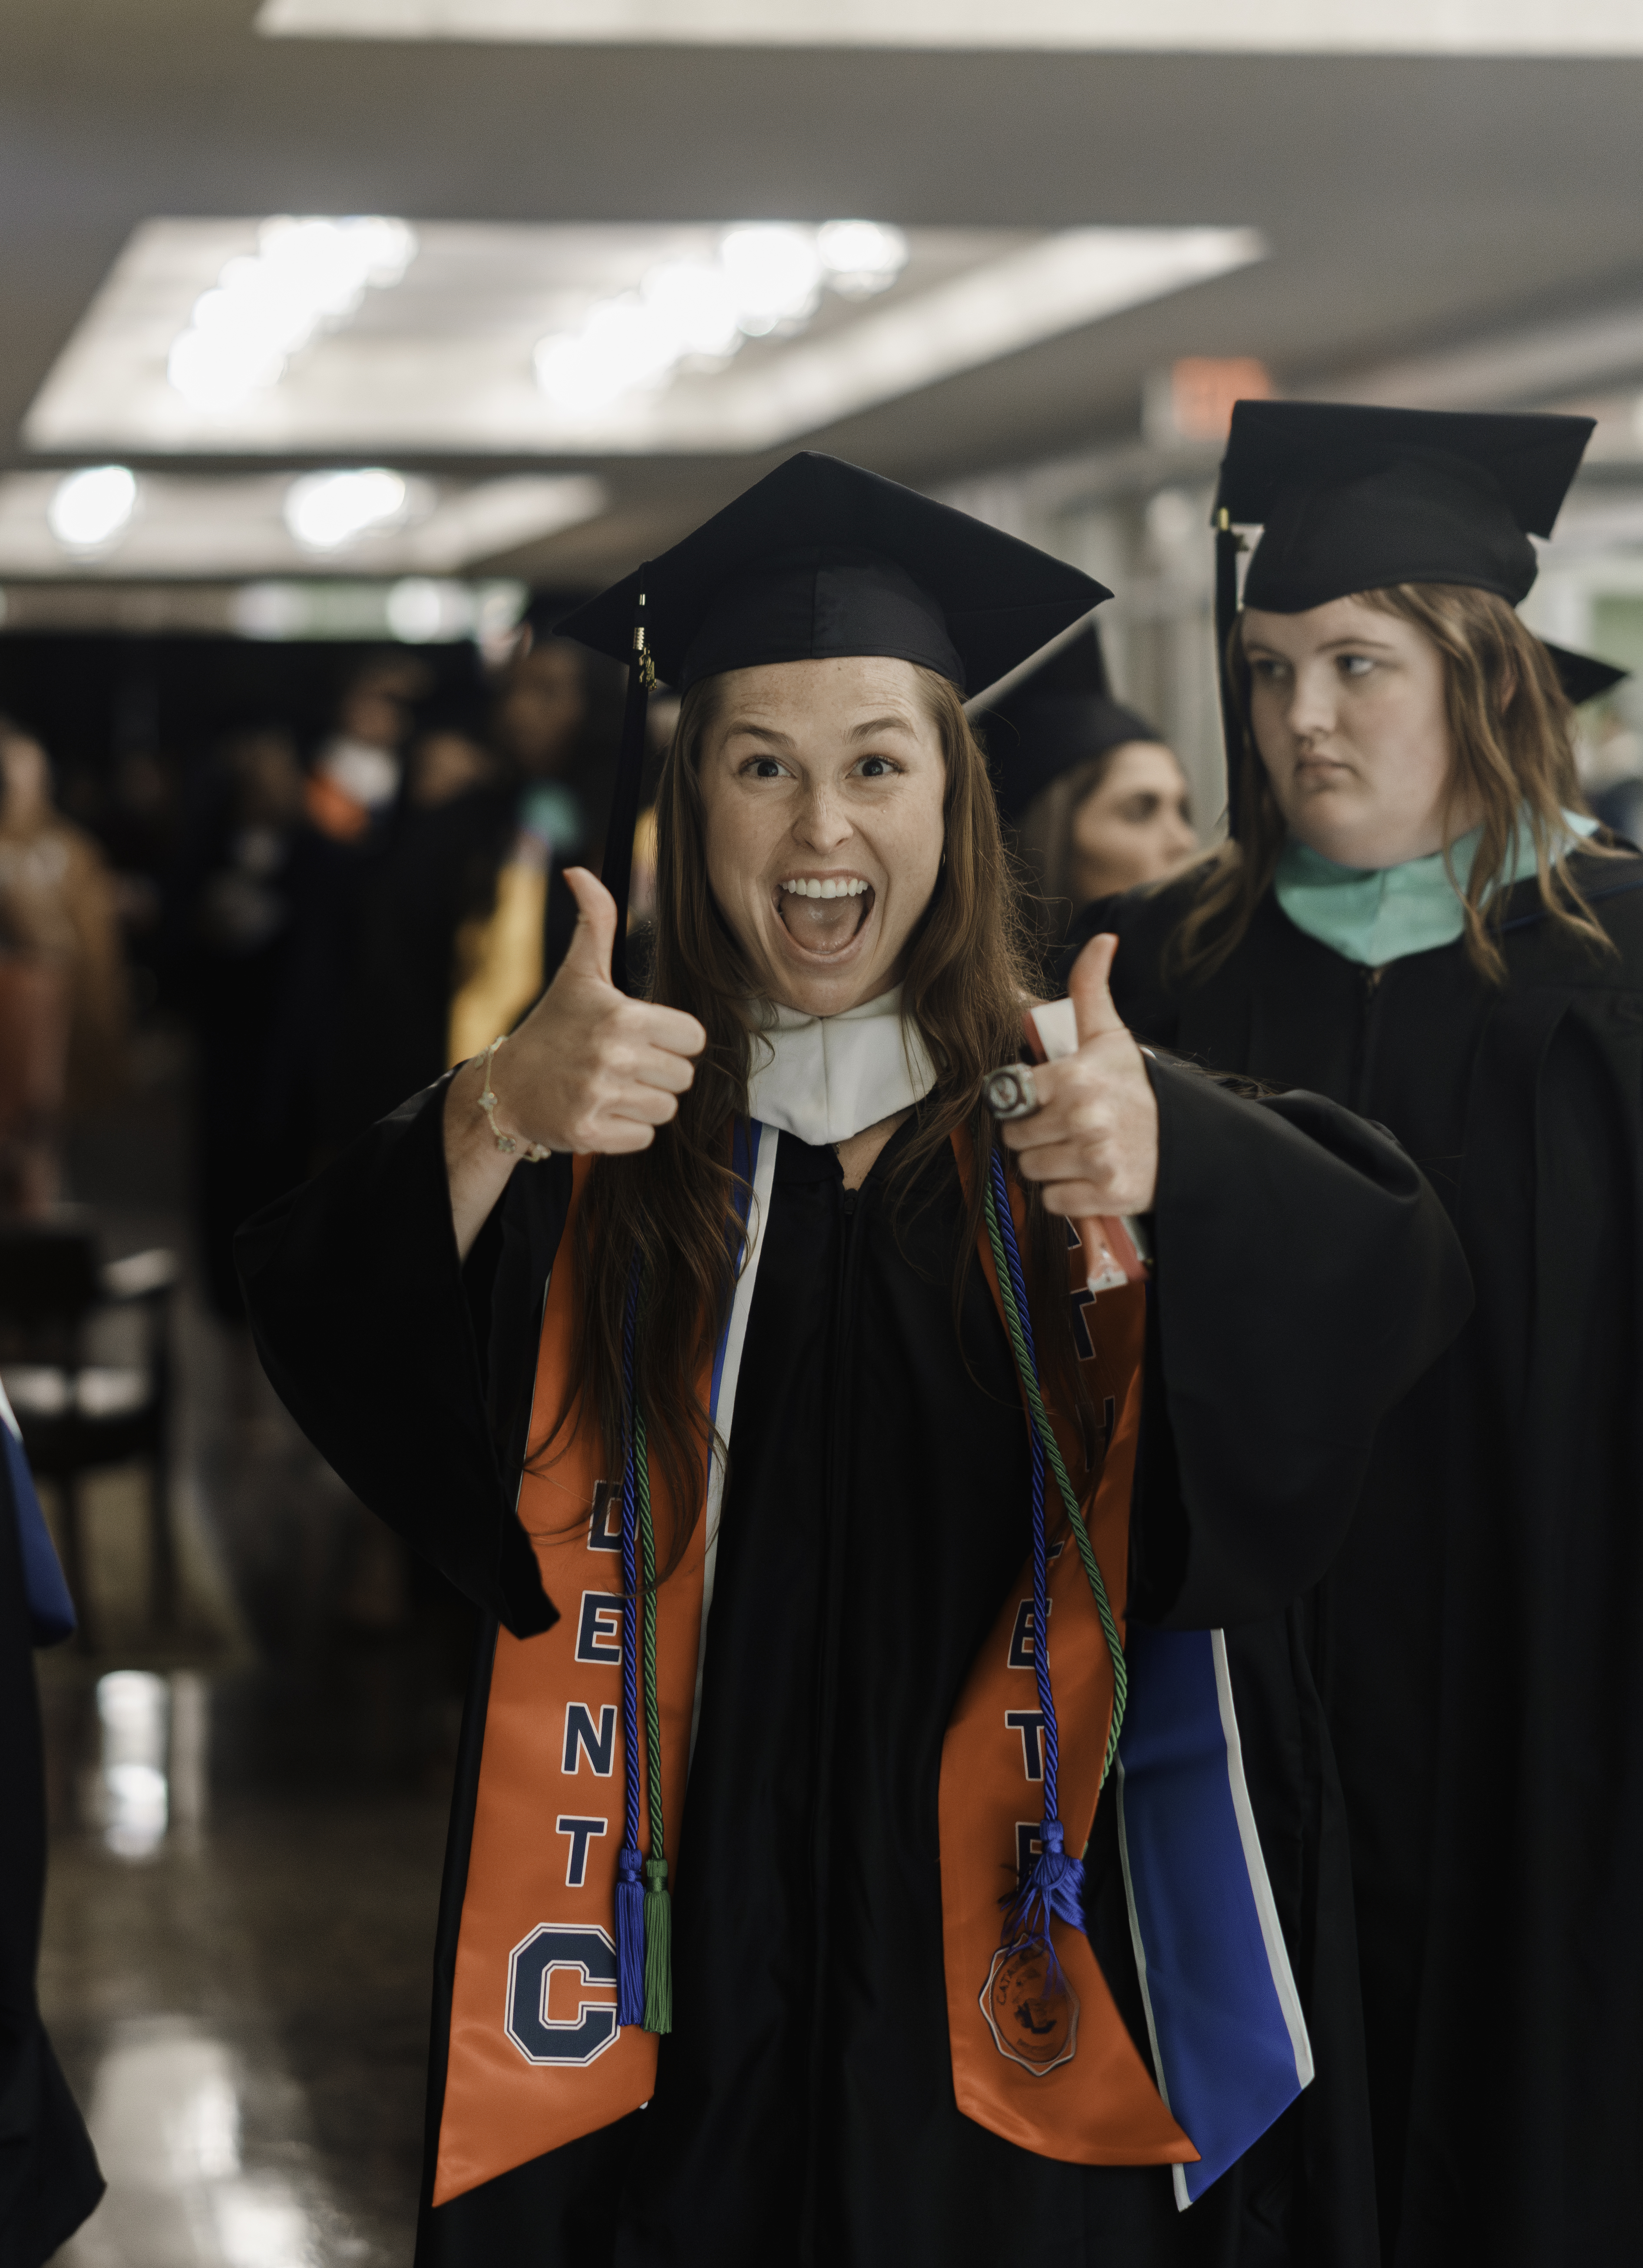 Female student-athlete graduate giving a double thumbs up